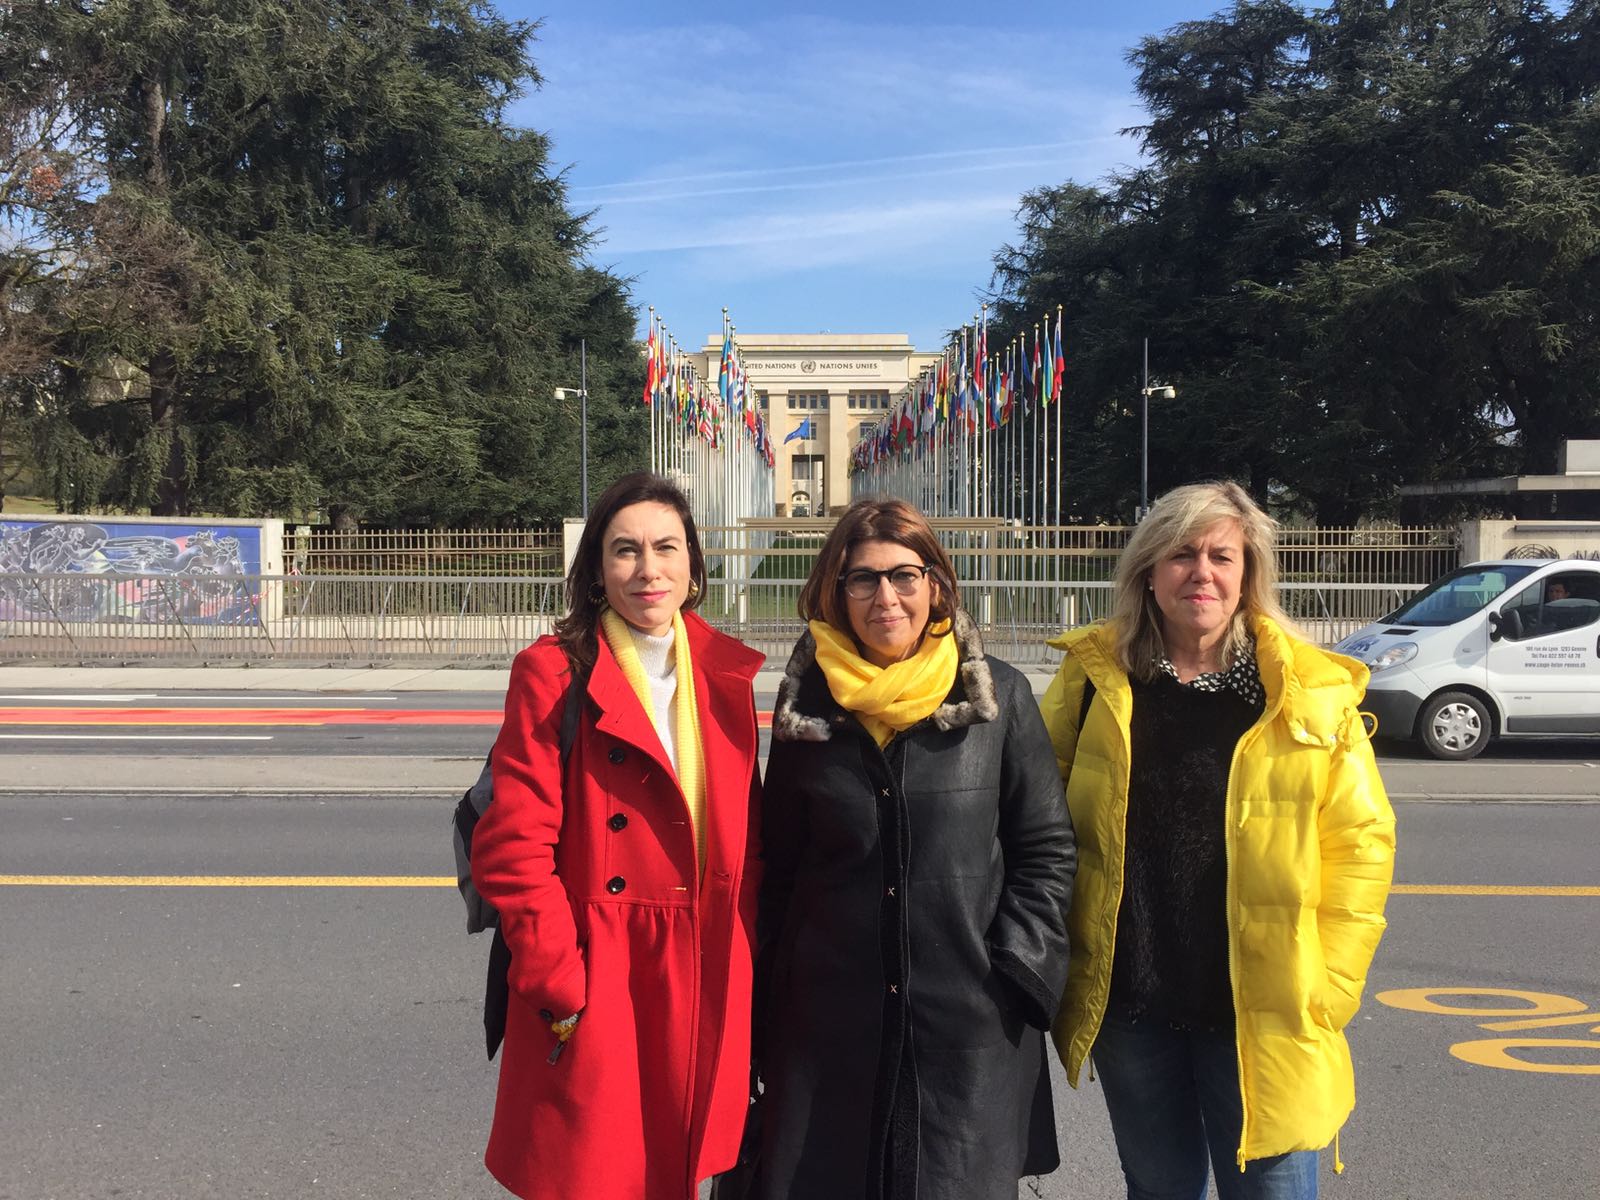 Relatives of the political prisoners make a "cry for help" at the UN